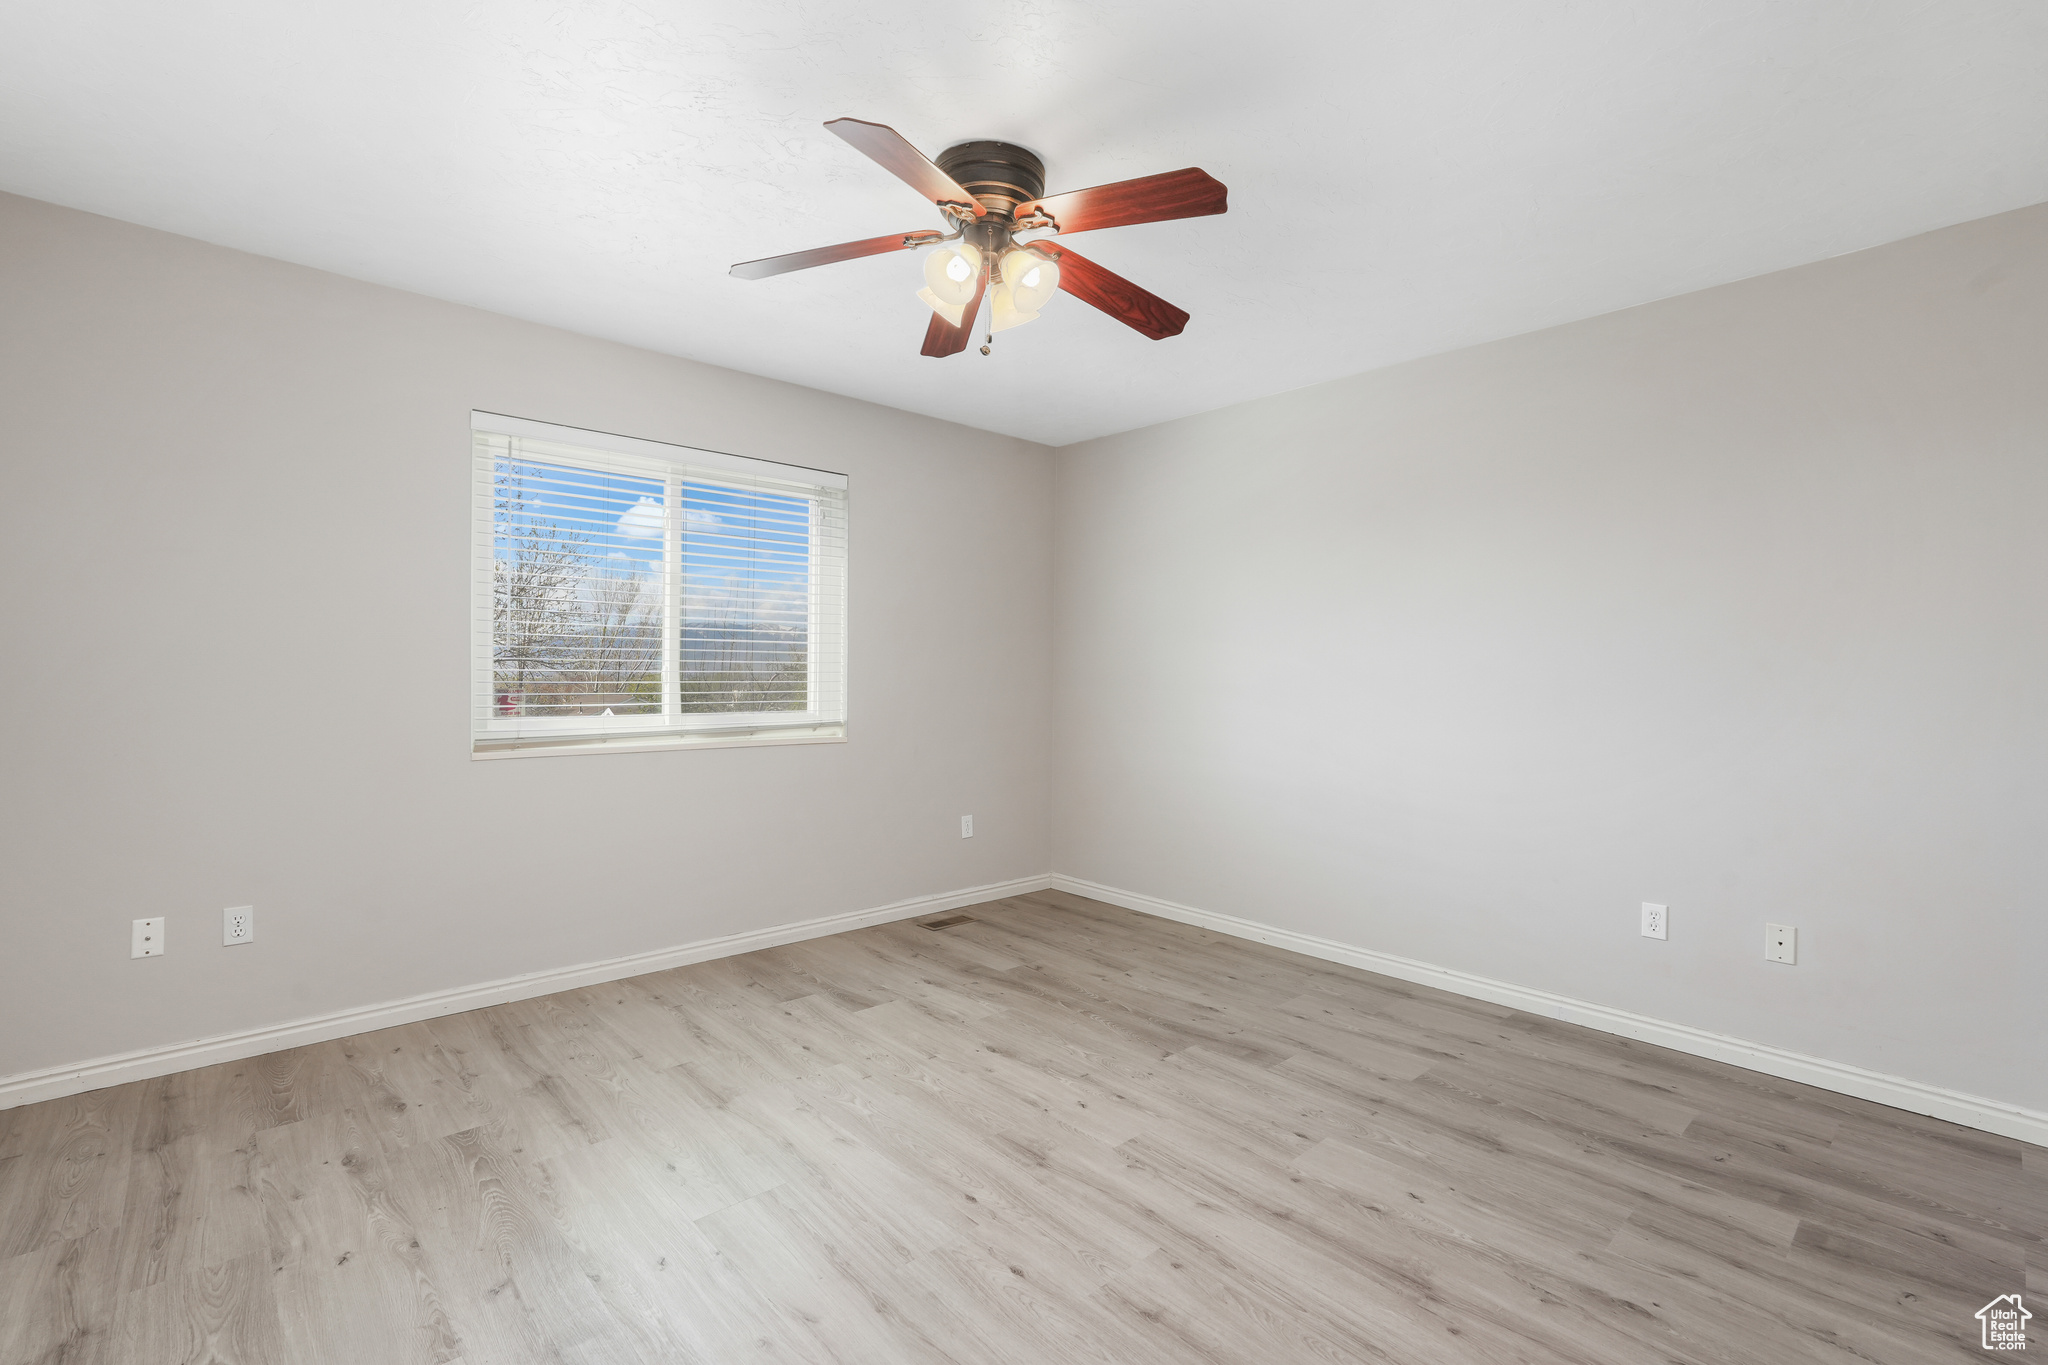 Unfurnished room with ceiling fan and light wood-type flooring